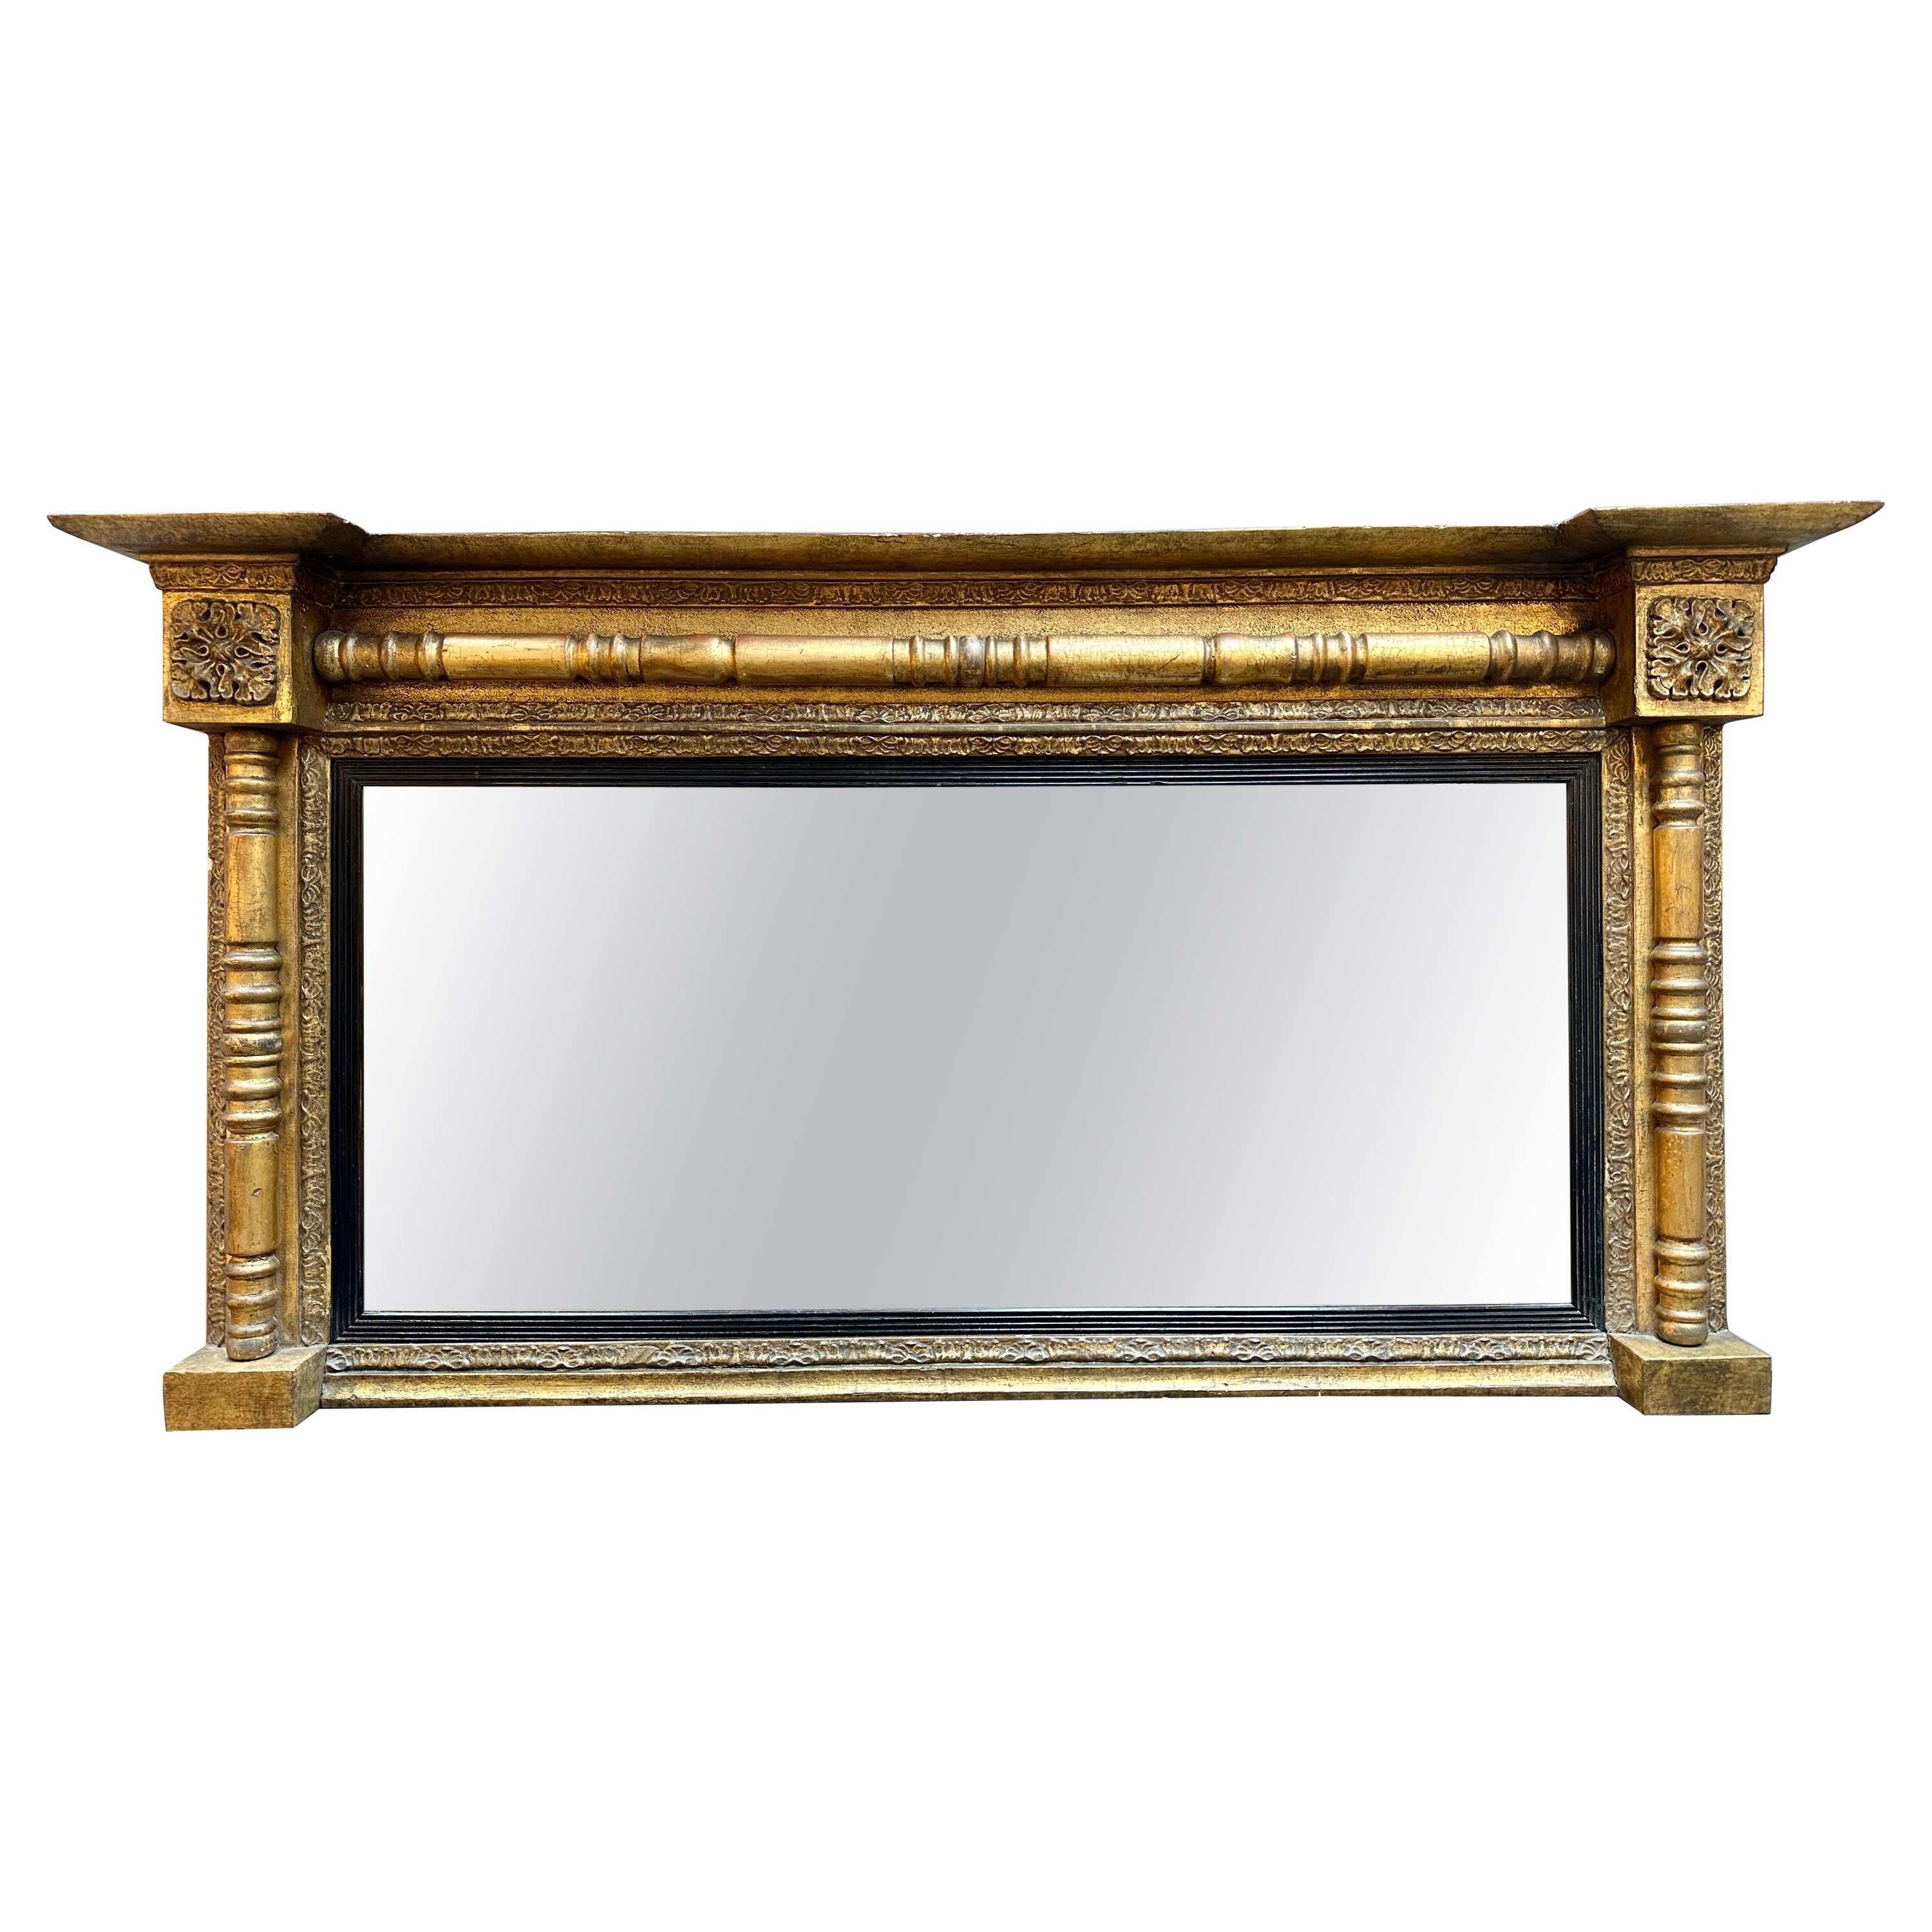 An Antique English Regency Gold Gilt Overmantel Mirror  For Sale